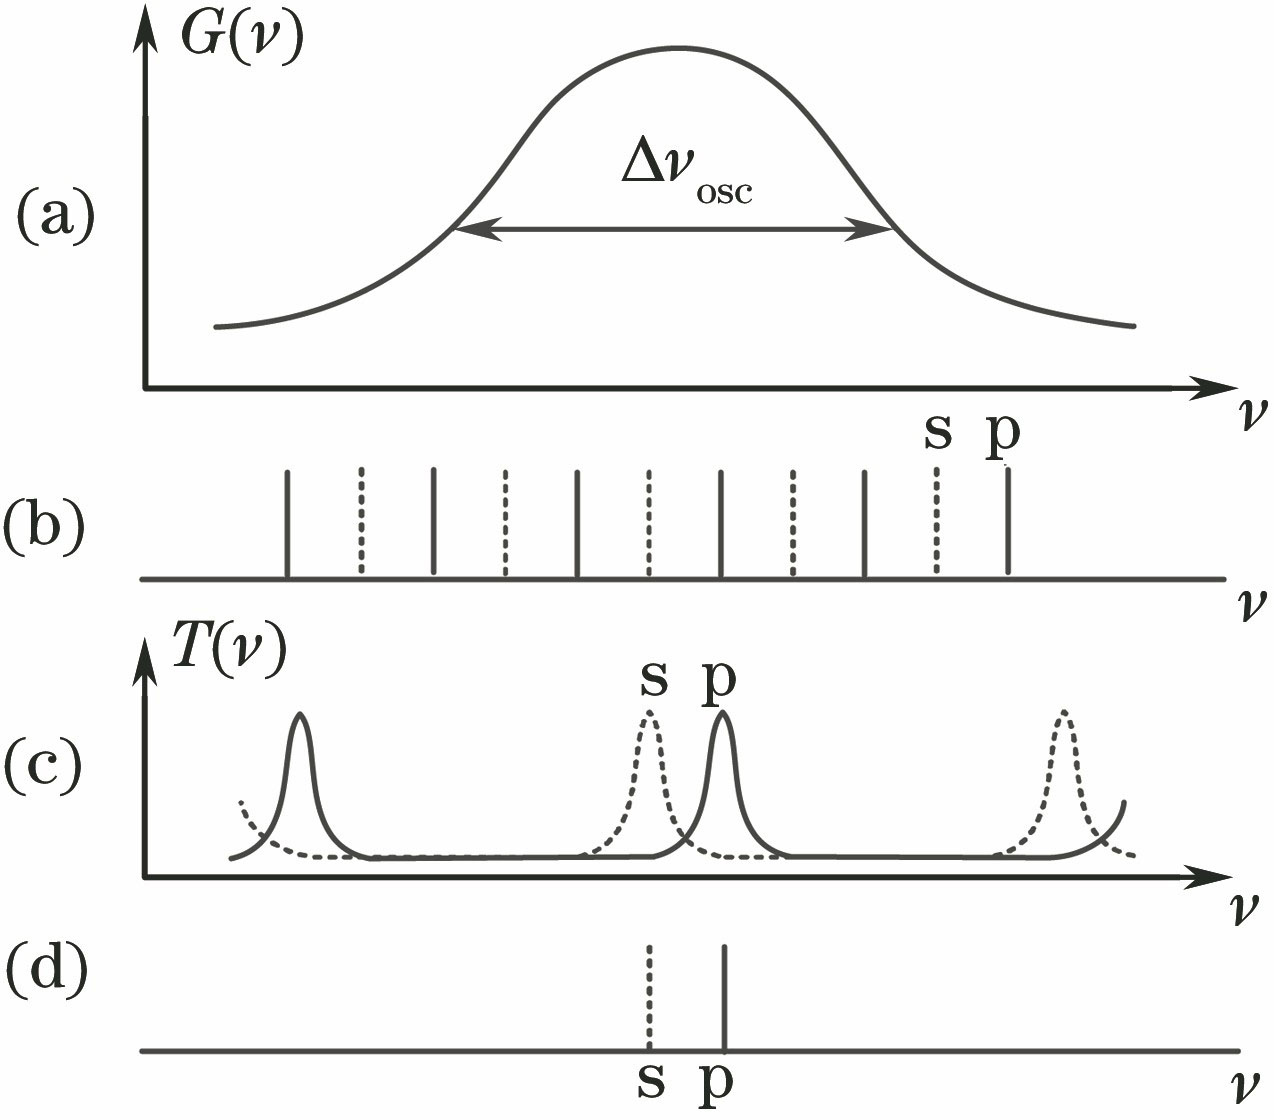 Oscillation principle of dual-frequency laser. (a) Gain curve; (b) longitudinal frequency combs; (c) transmission curves of birefringent filter; (d) laser oscillation modes